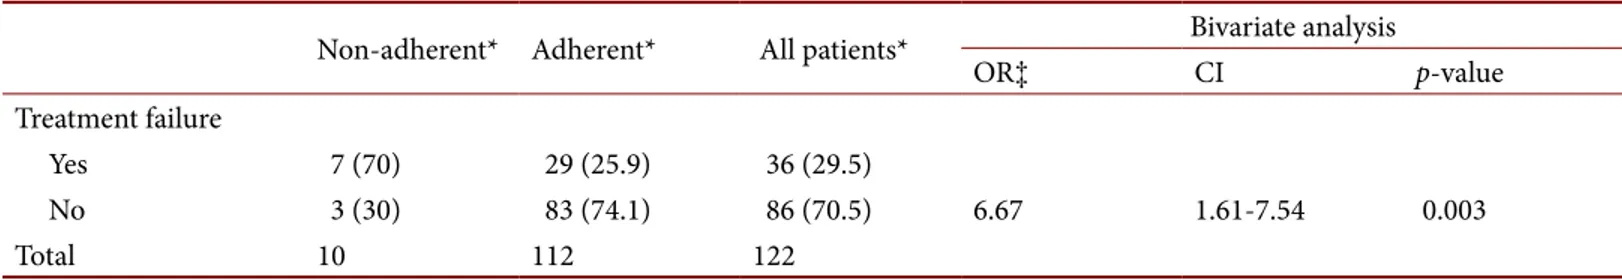 Table 2. Outcome according to the treatment adherence. Patients who suffered treatment failure were sorted by antiretroviral therapies  adherence.